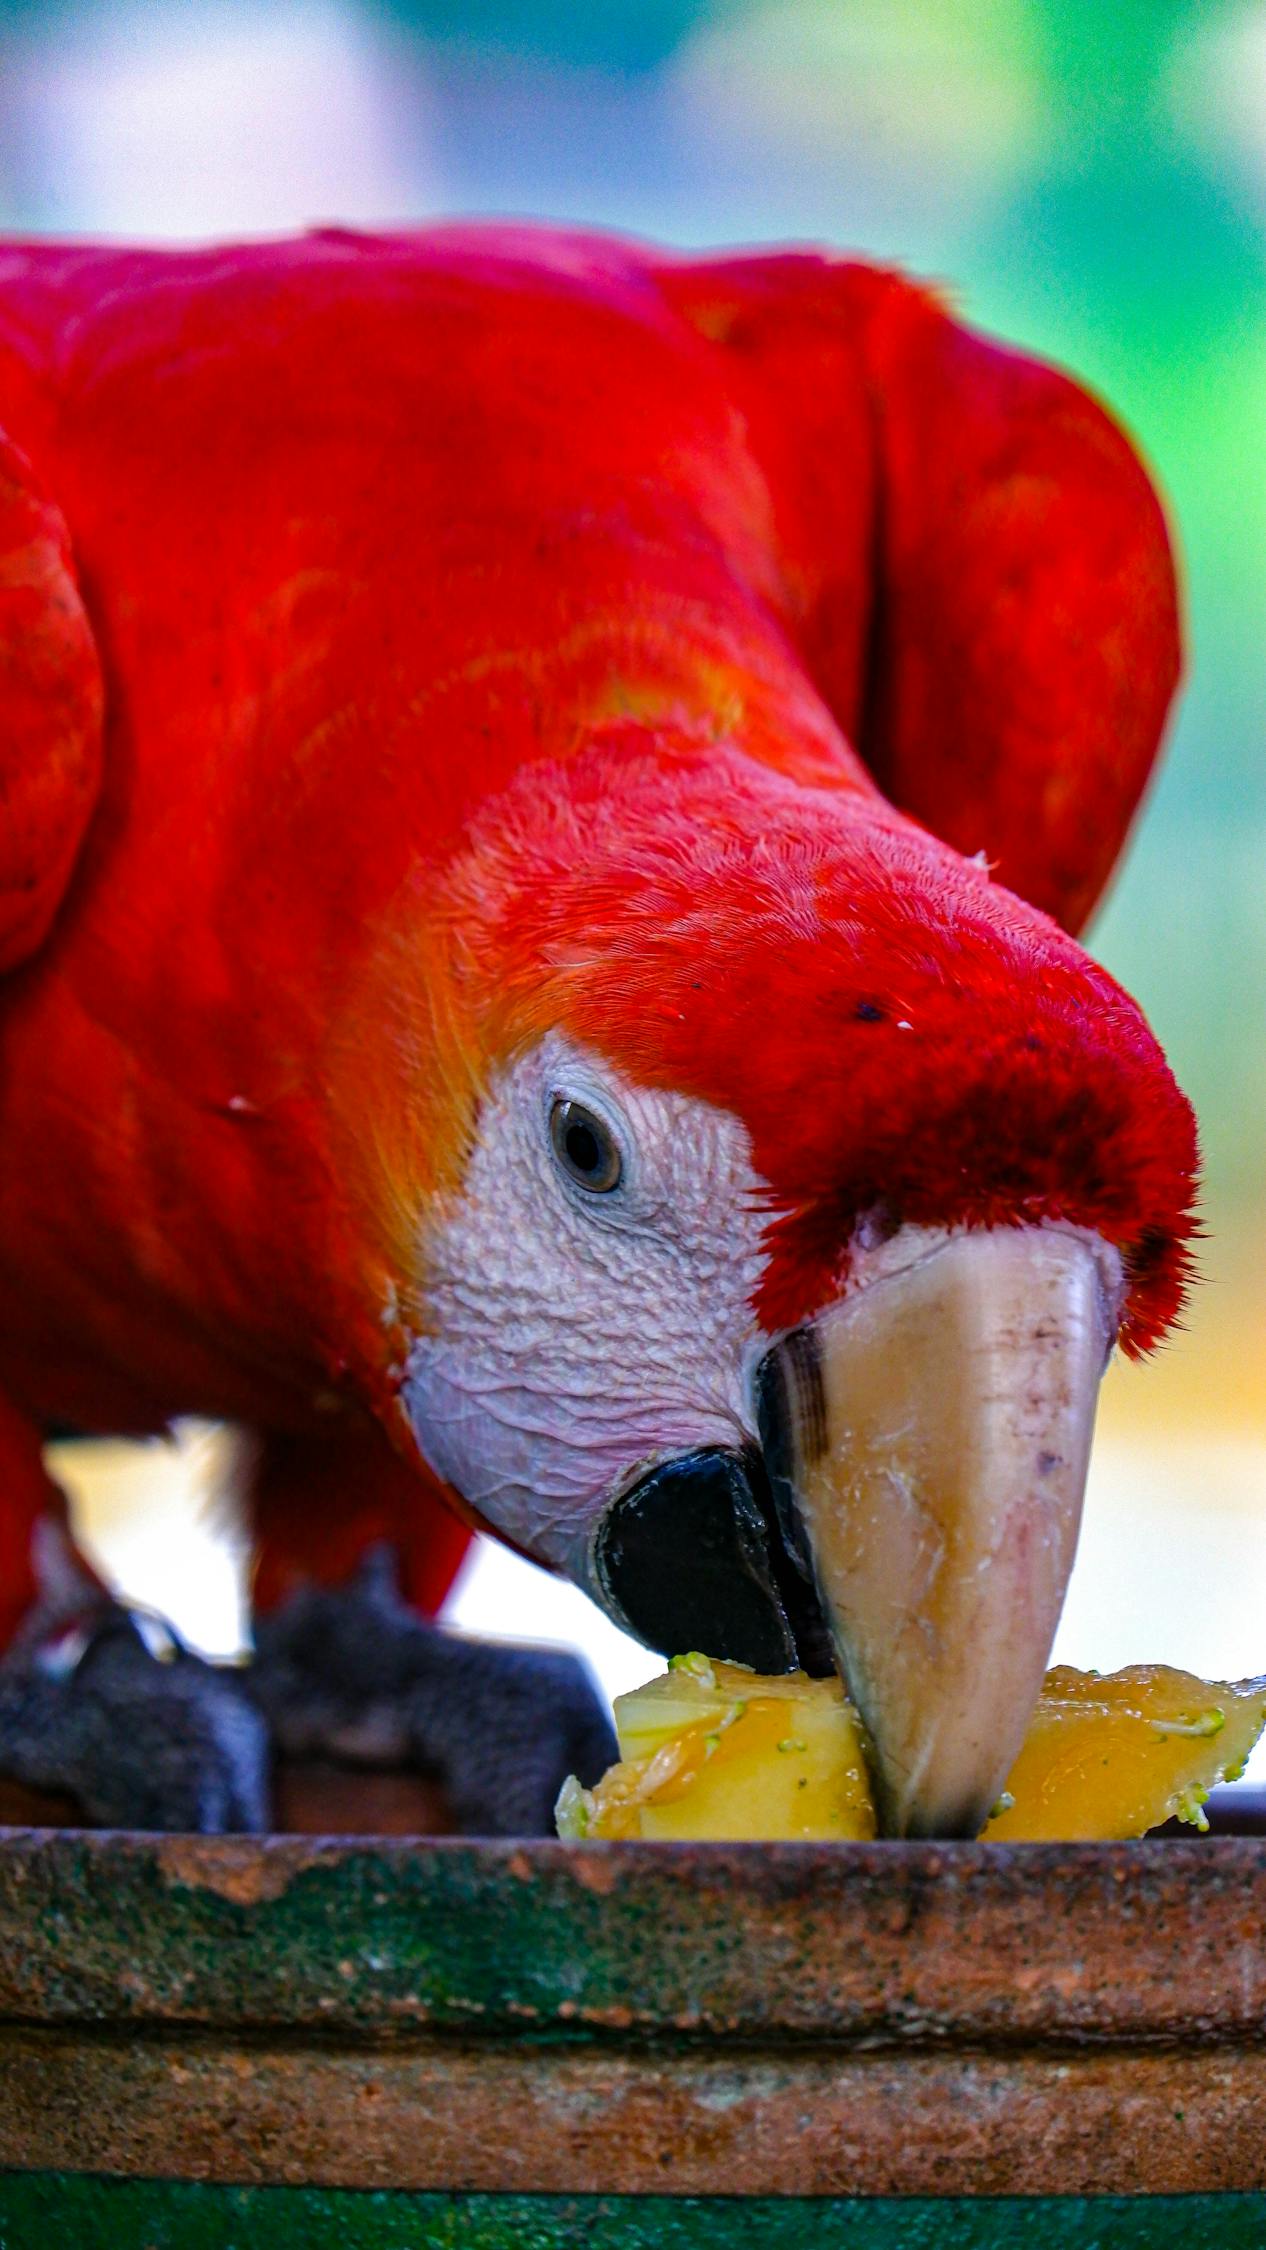 Red Parrot Eating